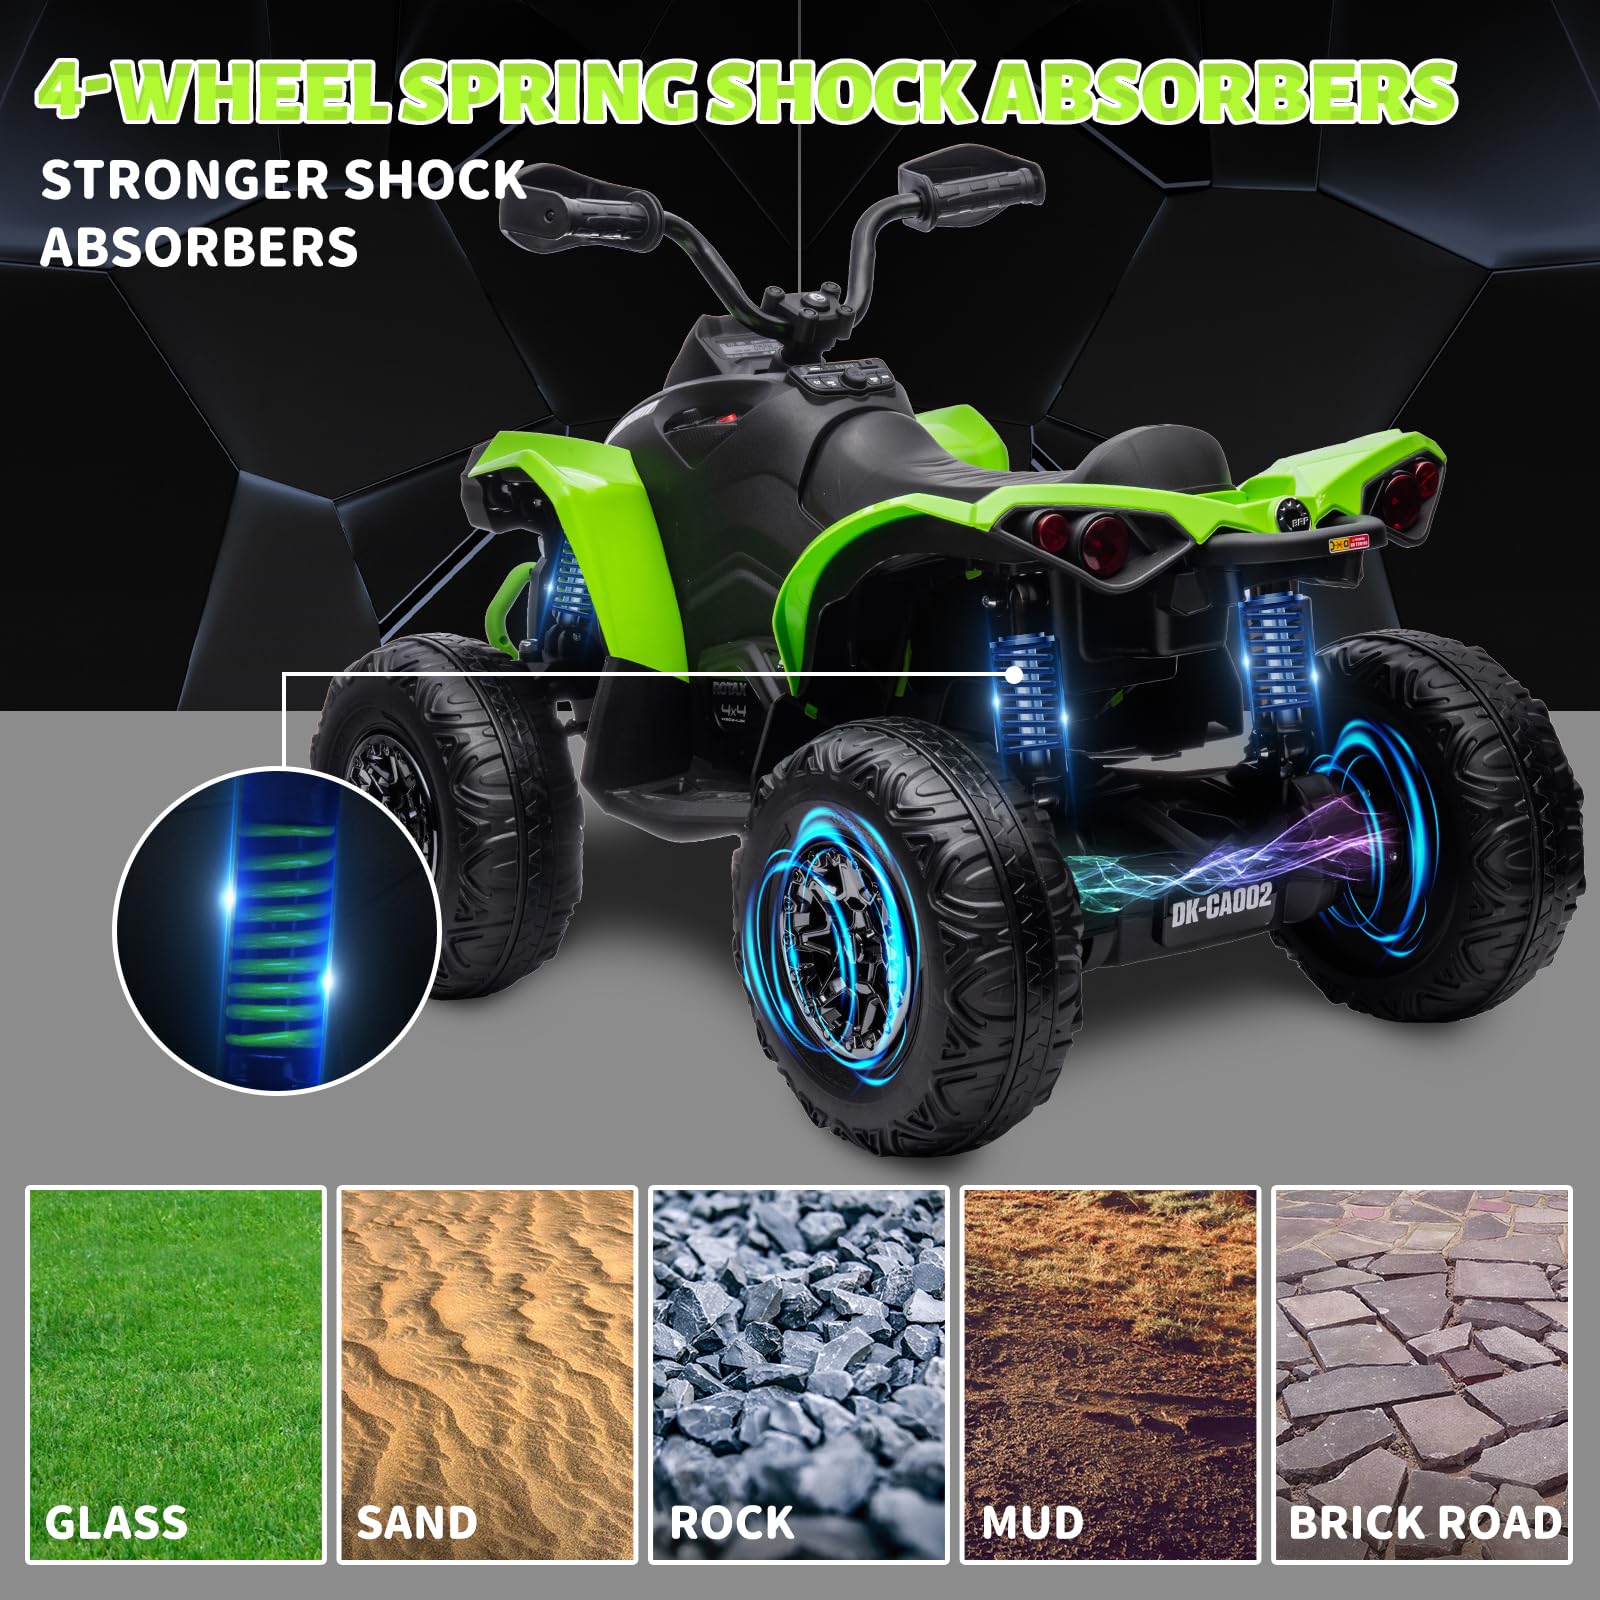 Kids ATV, 12V Ride on Toy Car Bombardier Licensed BRP Can-am 4 Wheeler Quad Electric Vehicle, w/LED Lights, Spring Suspension, Bluetooth, Music, USB, Treaded Tires, White